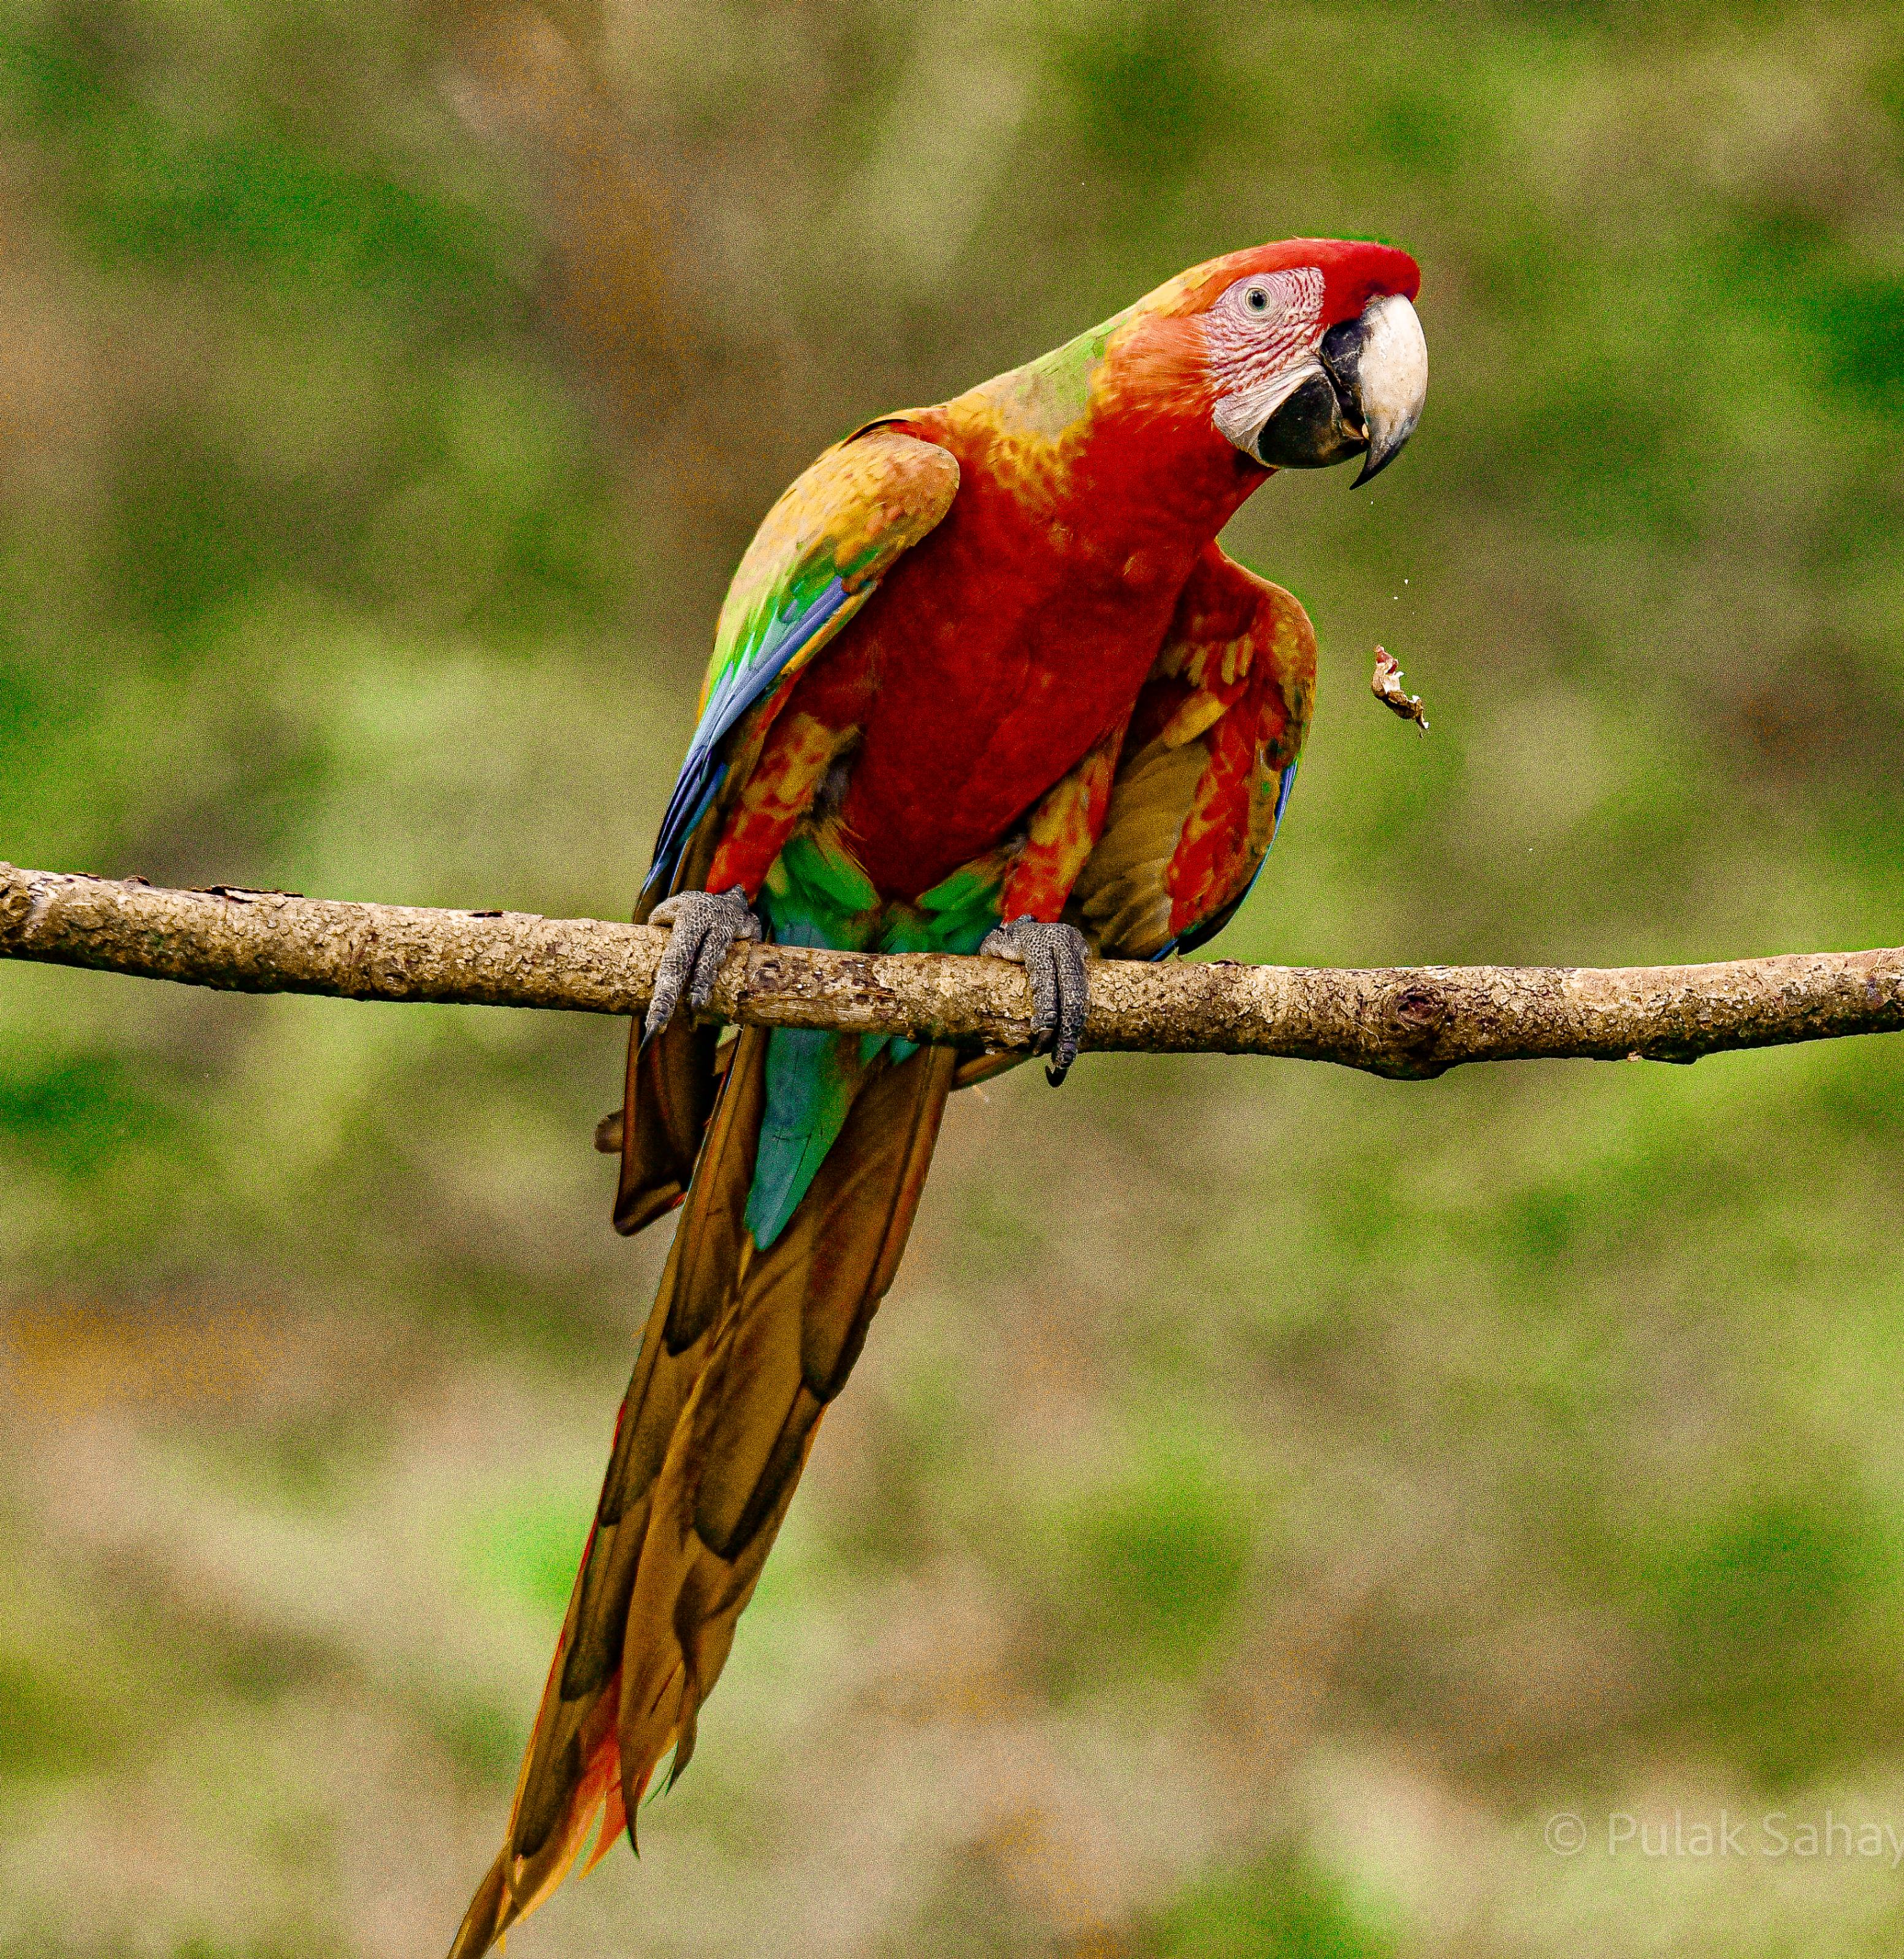 Macaw eating a nut